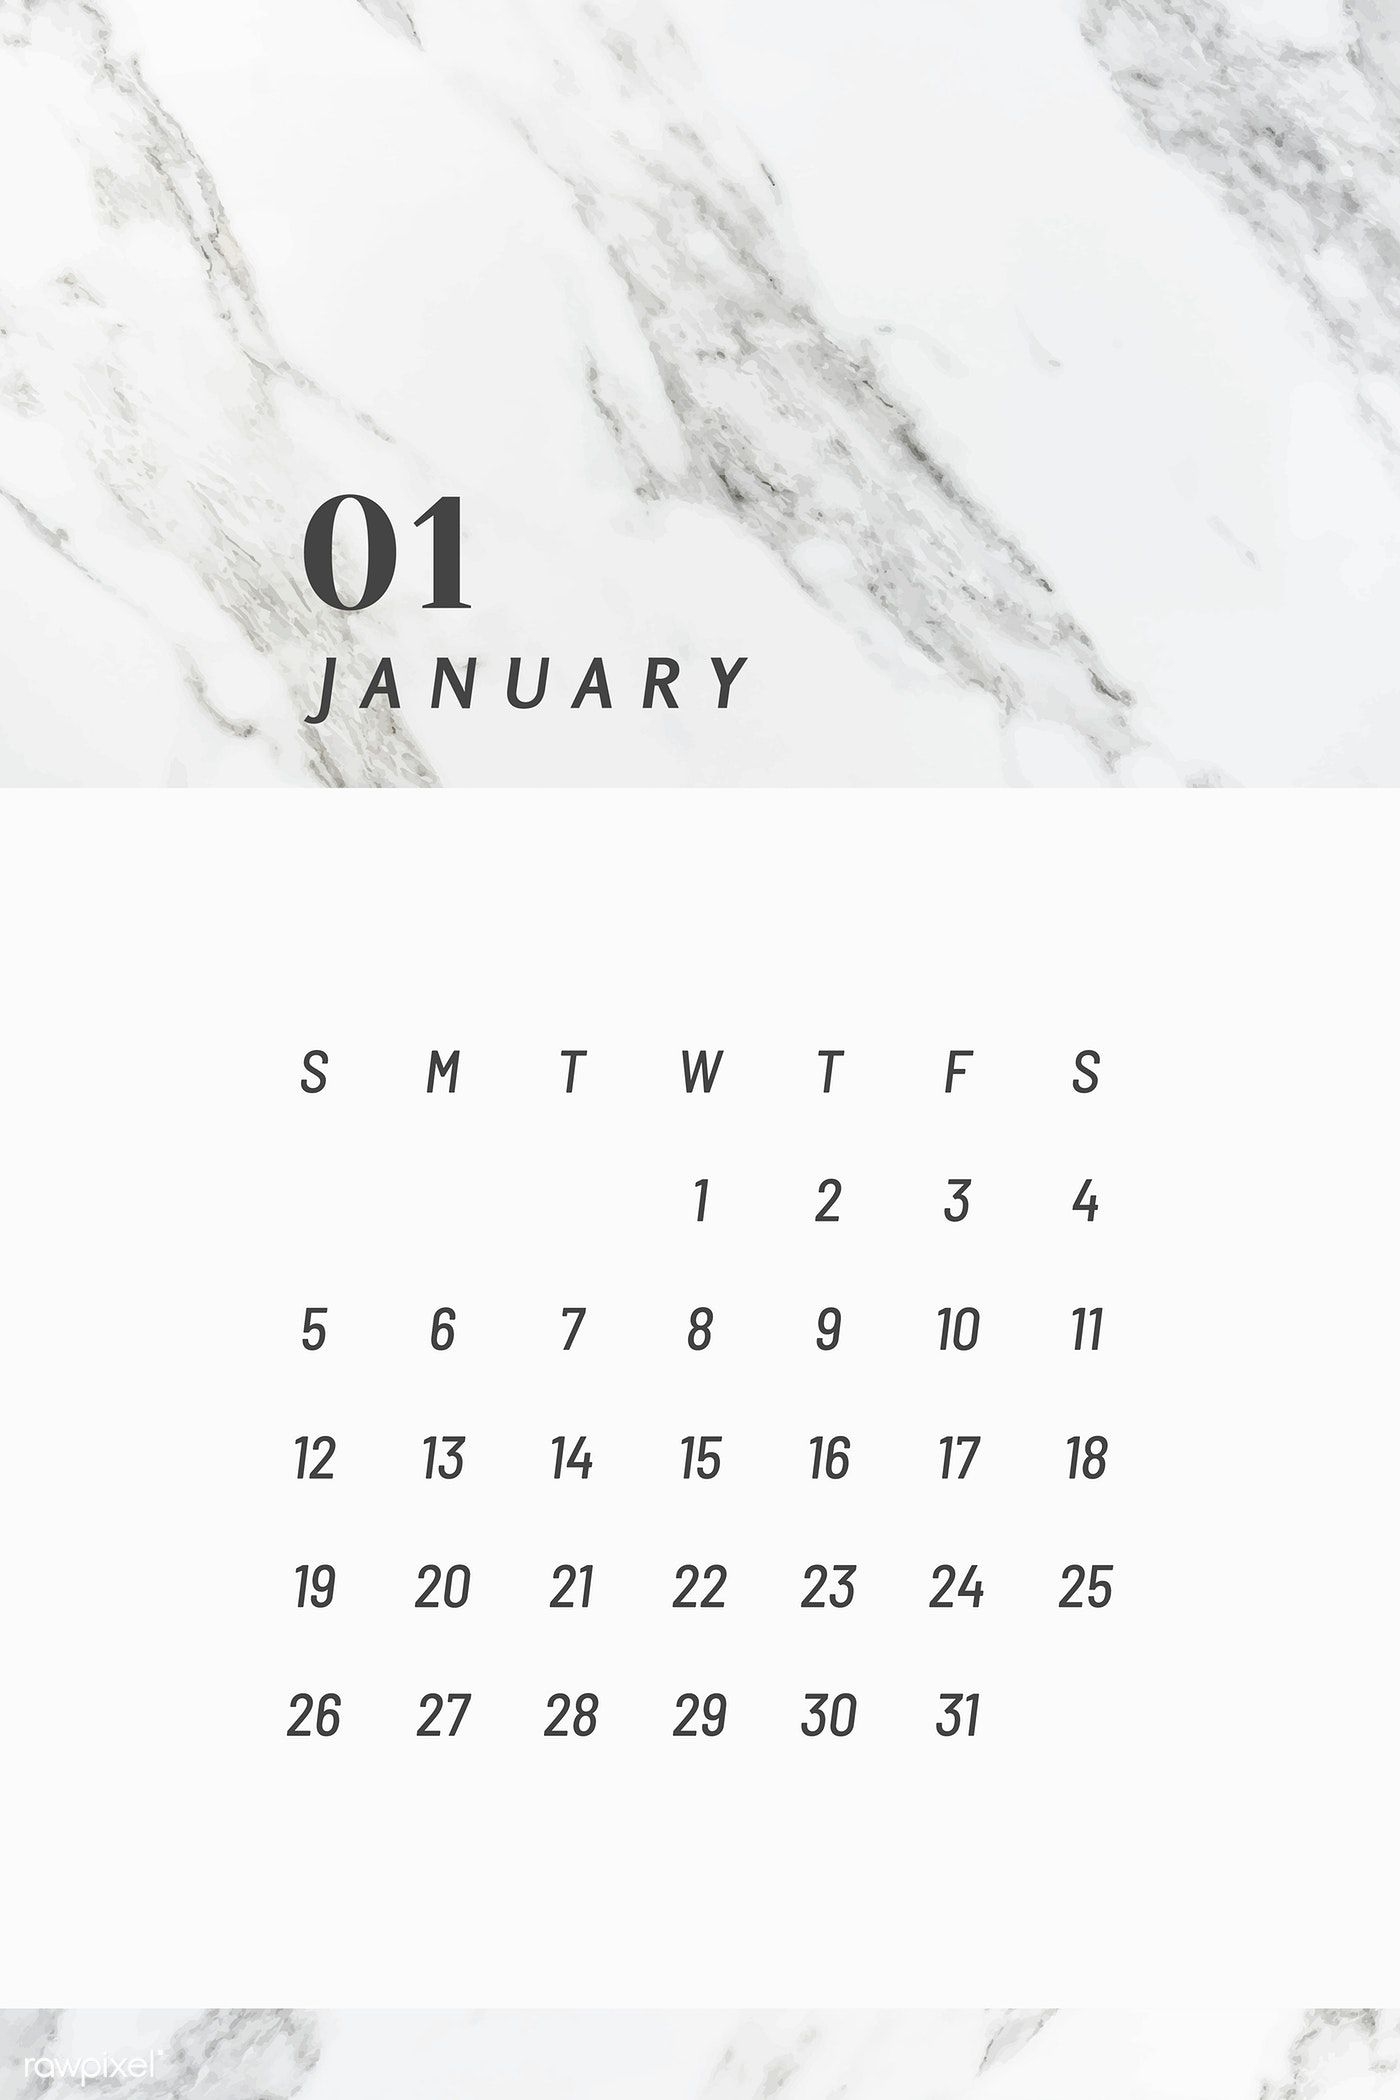 Black And White January Calendar 2020 Vector | Free Image By Free Black And Wite Calendar 2020